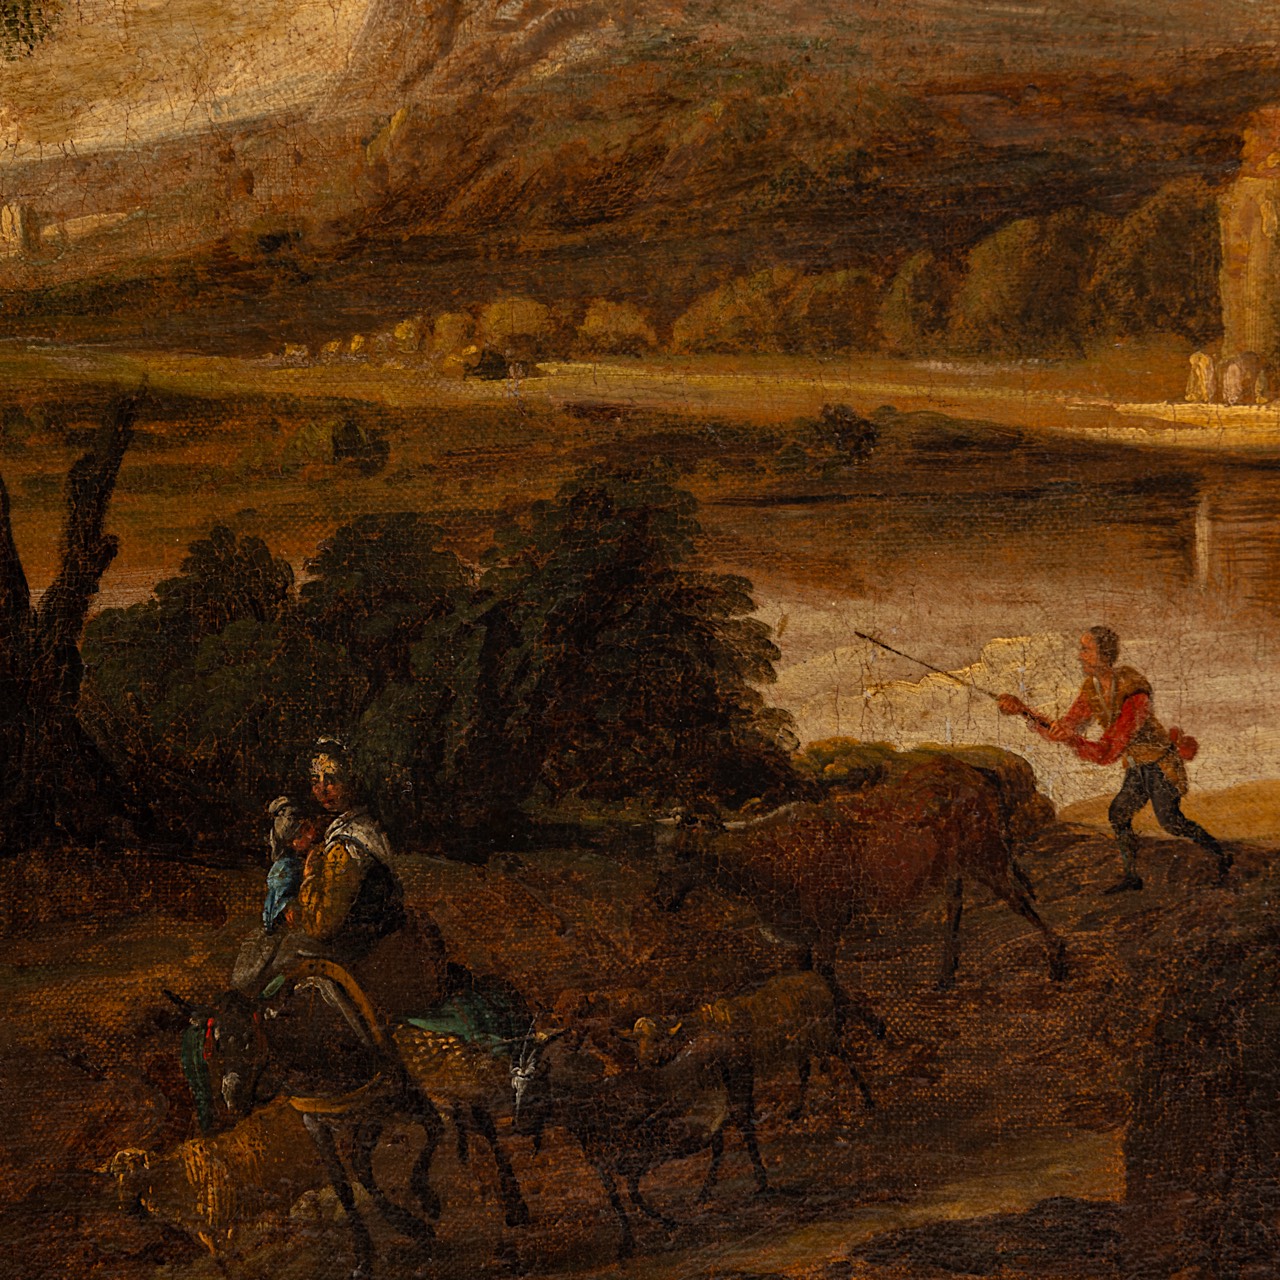 An Italianised pastoral landscape, 17thC Dutch School, oil on canvas 77 x 110 cm. (30.3 x 43.3 in.), - Image 6 of 6